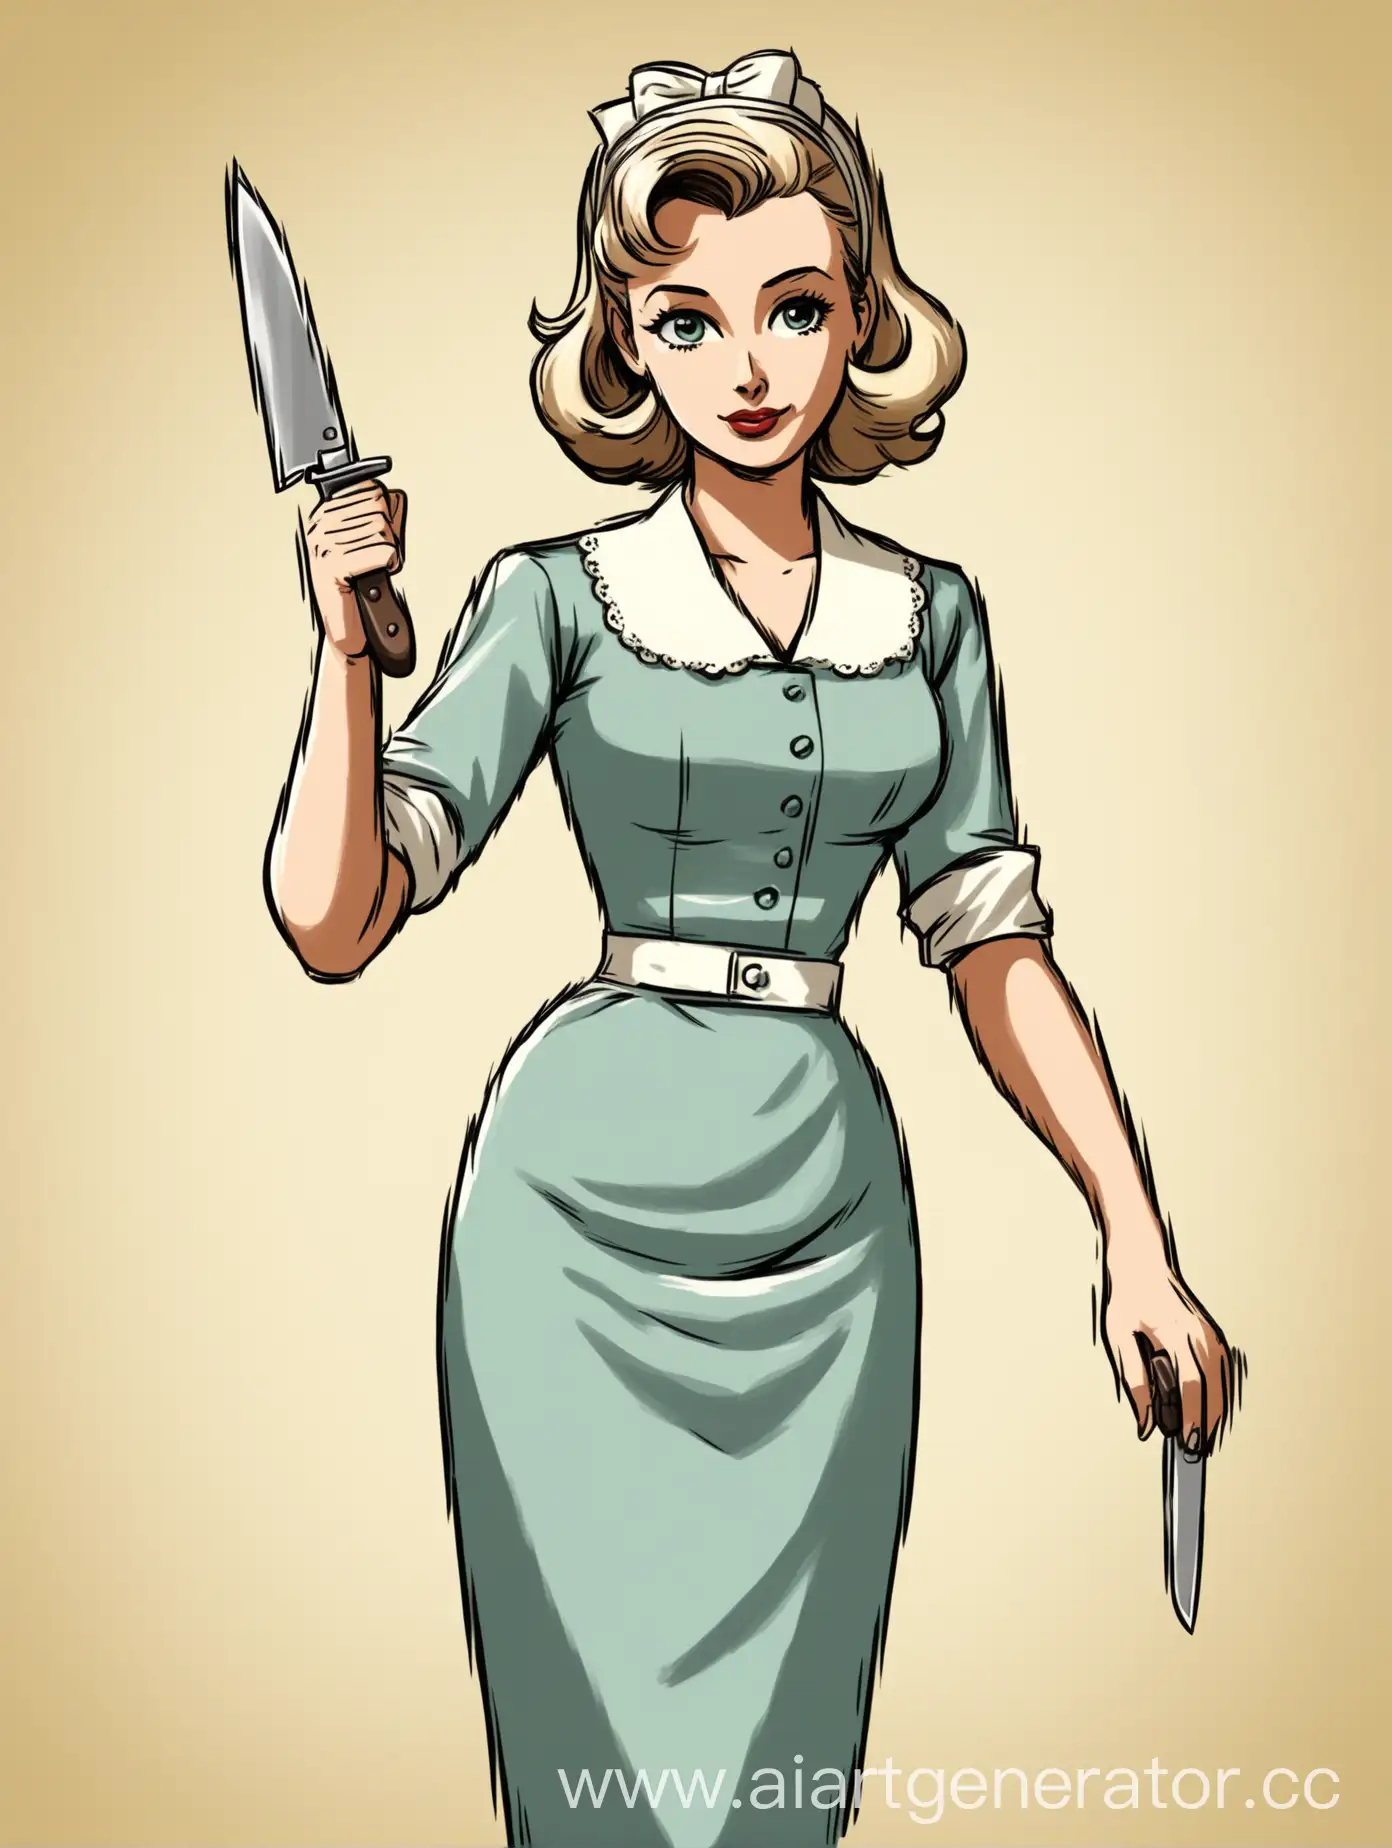 1950s-Housewife-Holding-Knife-Retro-Woman-in-Vintage-Kitchen-Attire